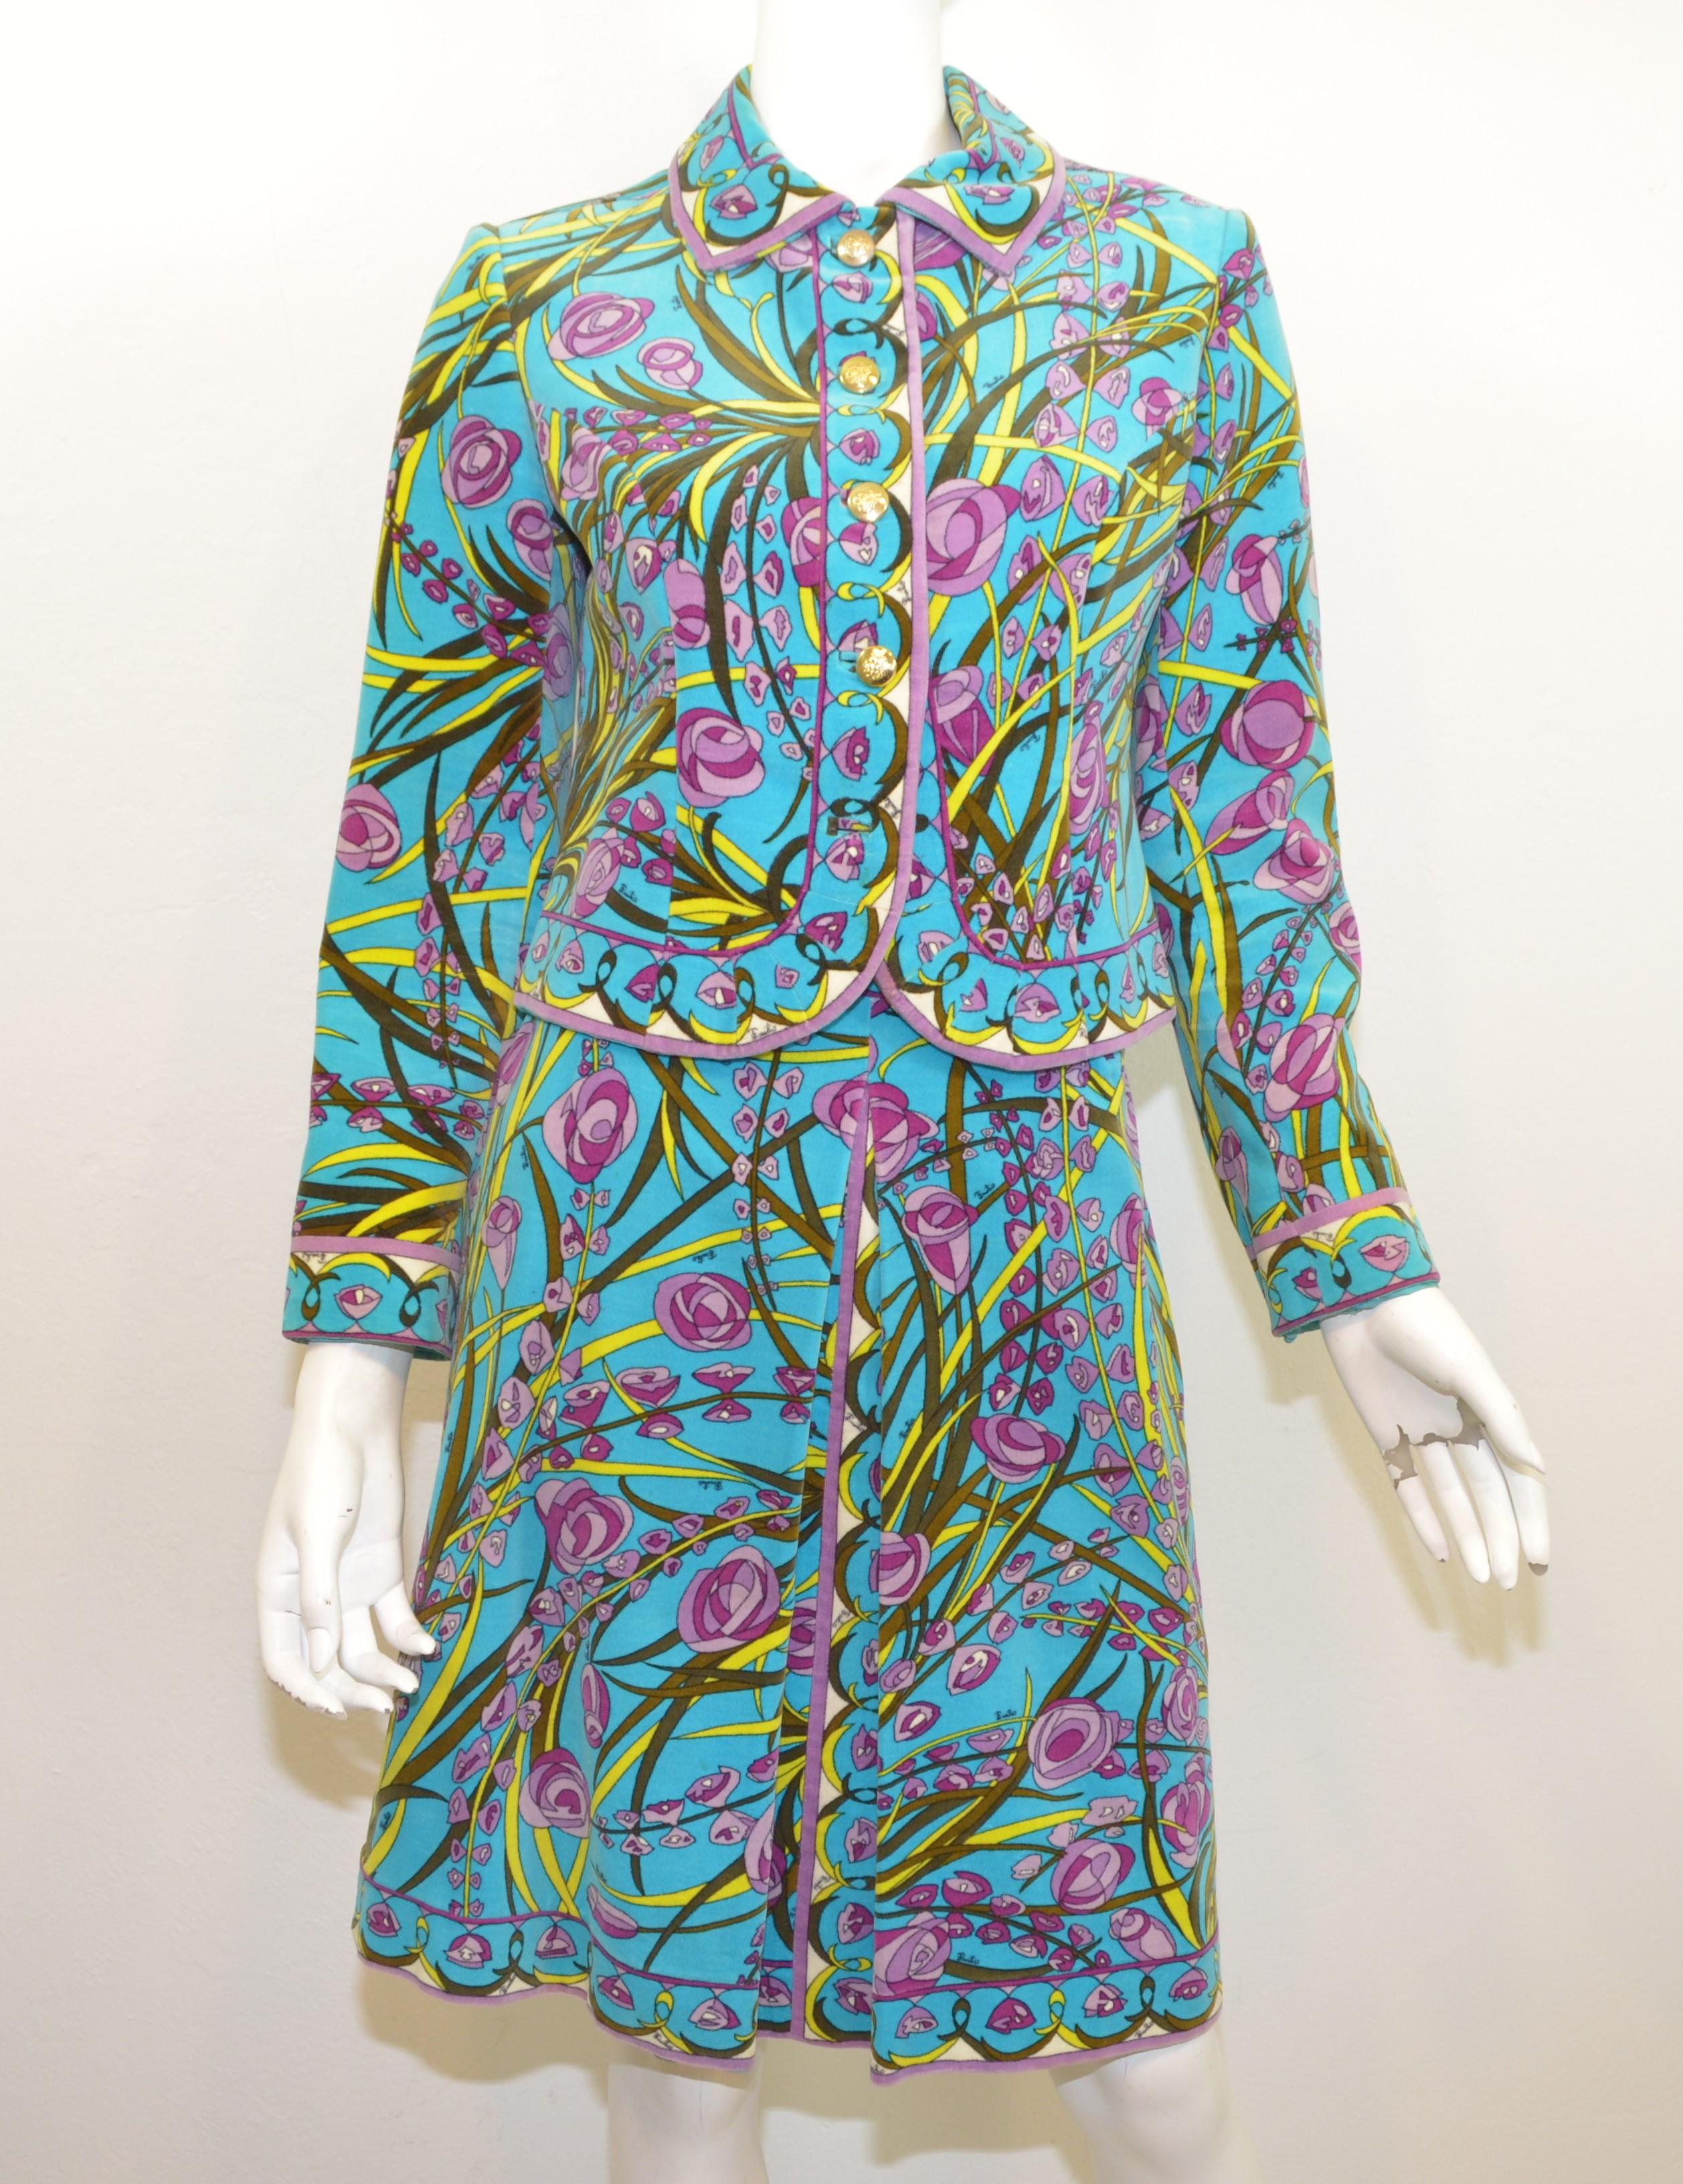 Vintage 1970's Emilio Pucci velvet cotton skirt and jacket set is featured in a vibrant blue with a purple, green, and yellow floral print throughout. Jacket is labeled size 10 with gold-tone button closures along the front (one missing as